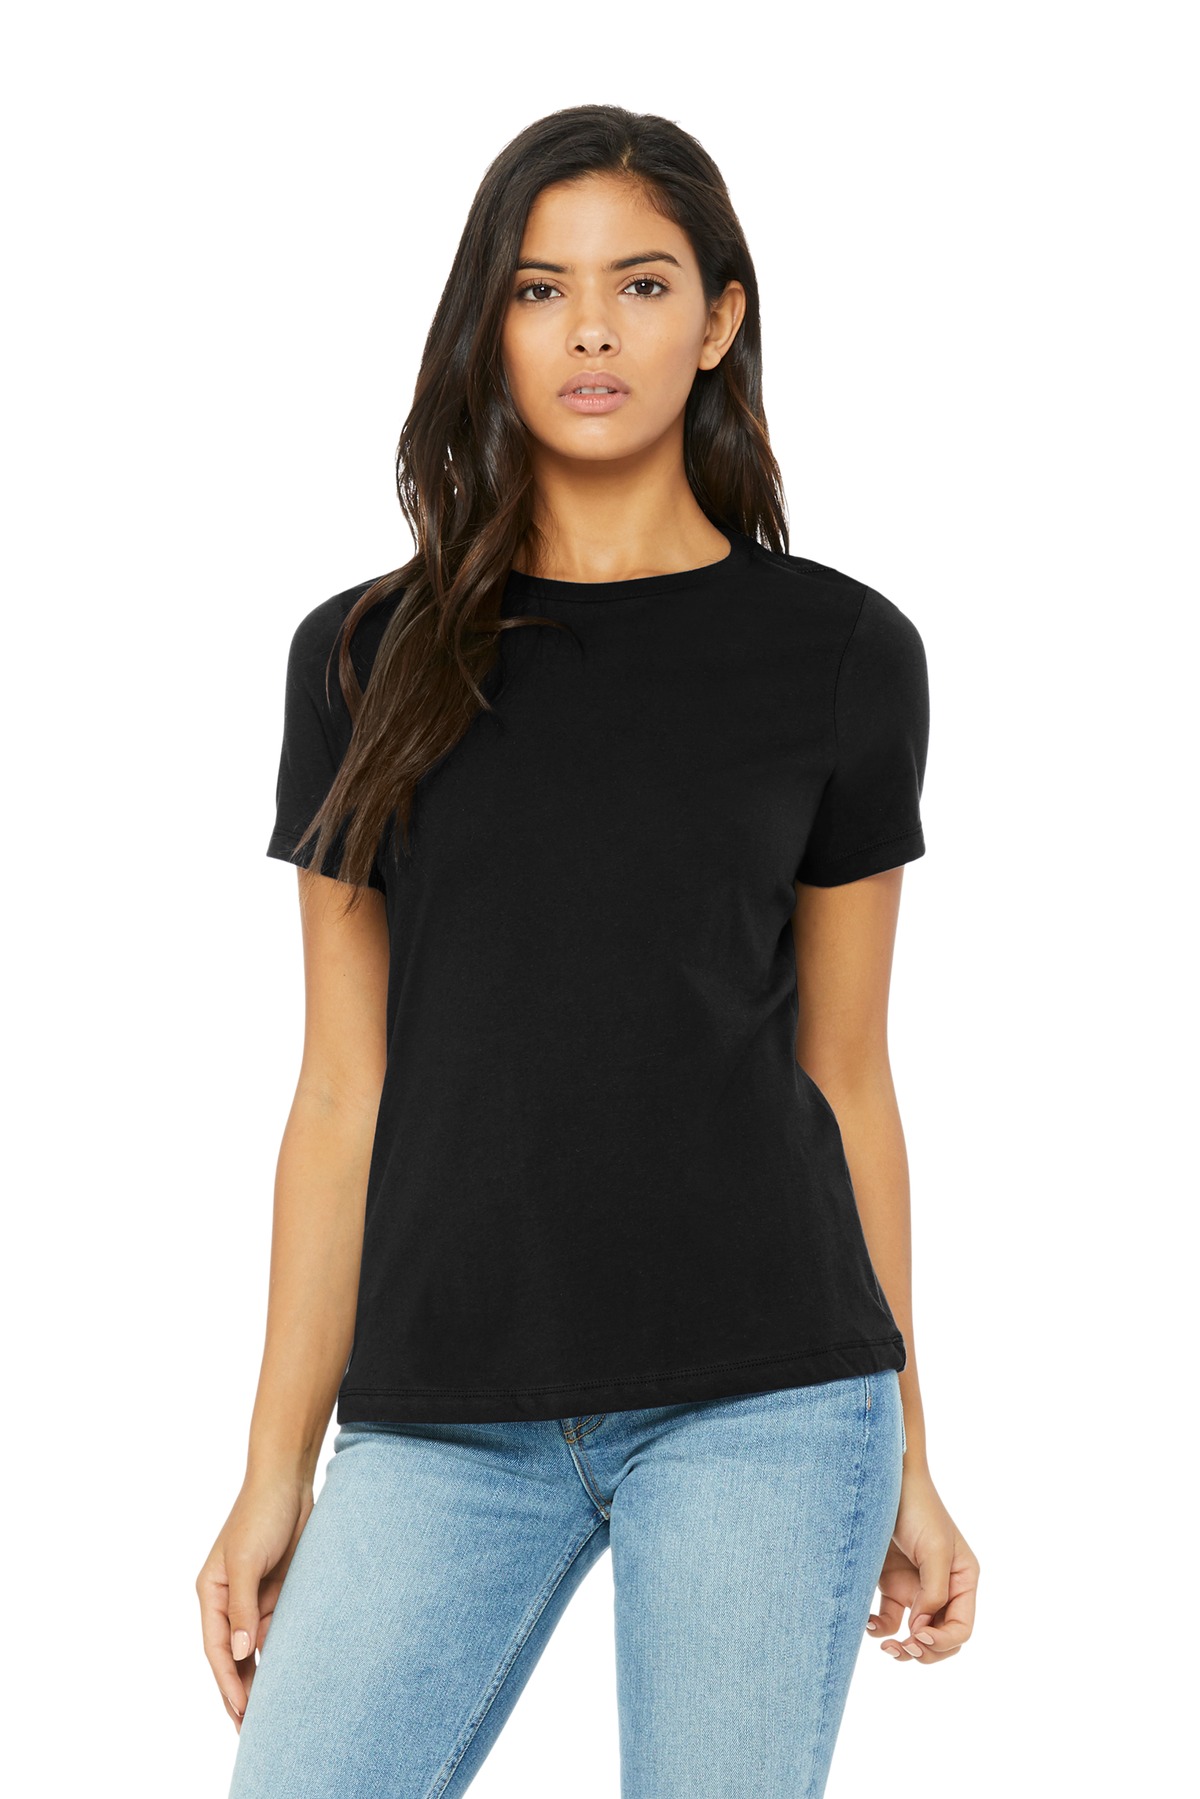 BELLA+CANVAS Women''s Relaxed Jersey Short Sleeve Tee. BC6400